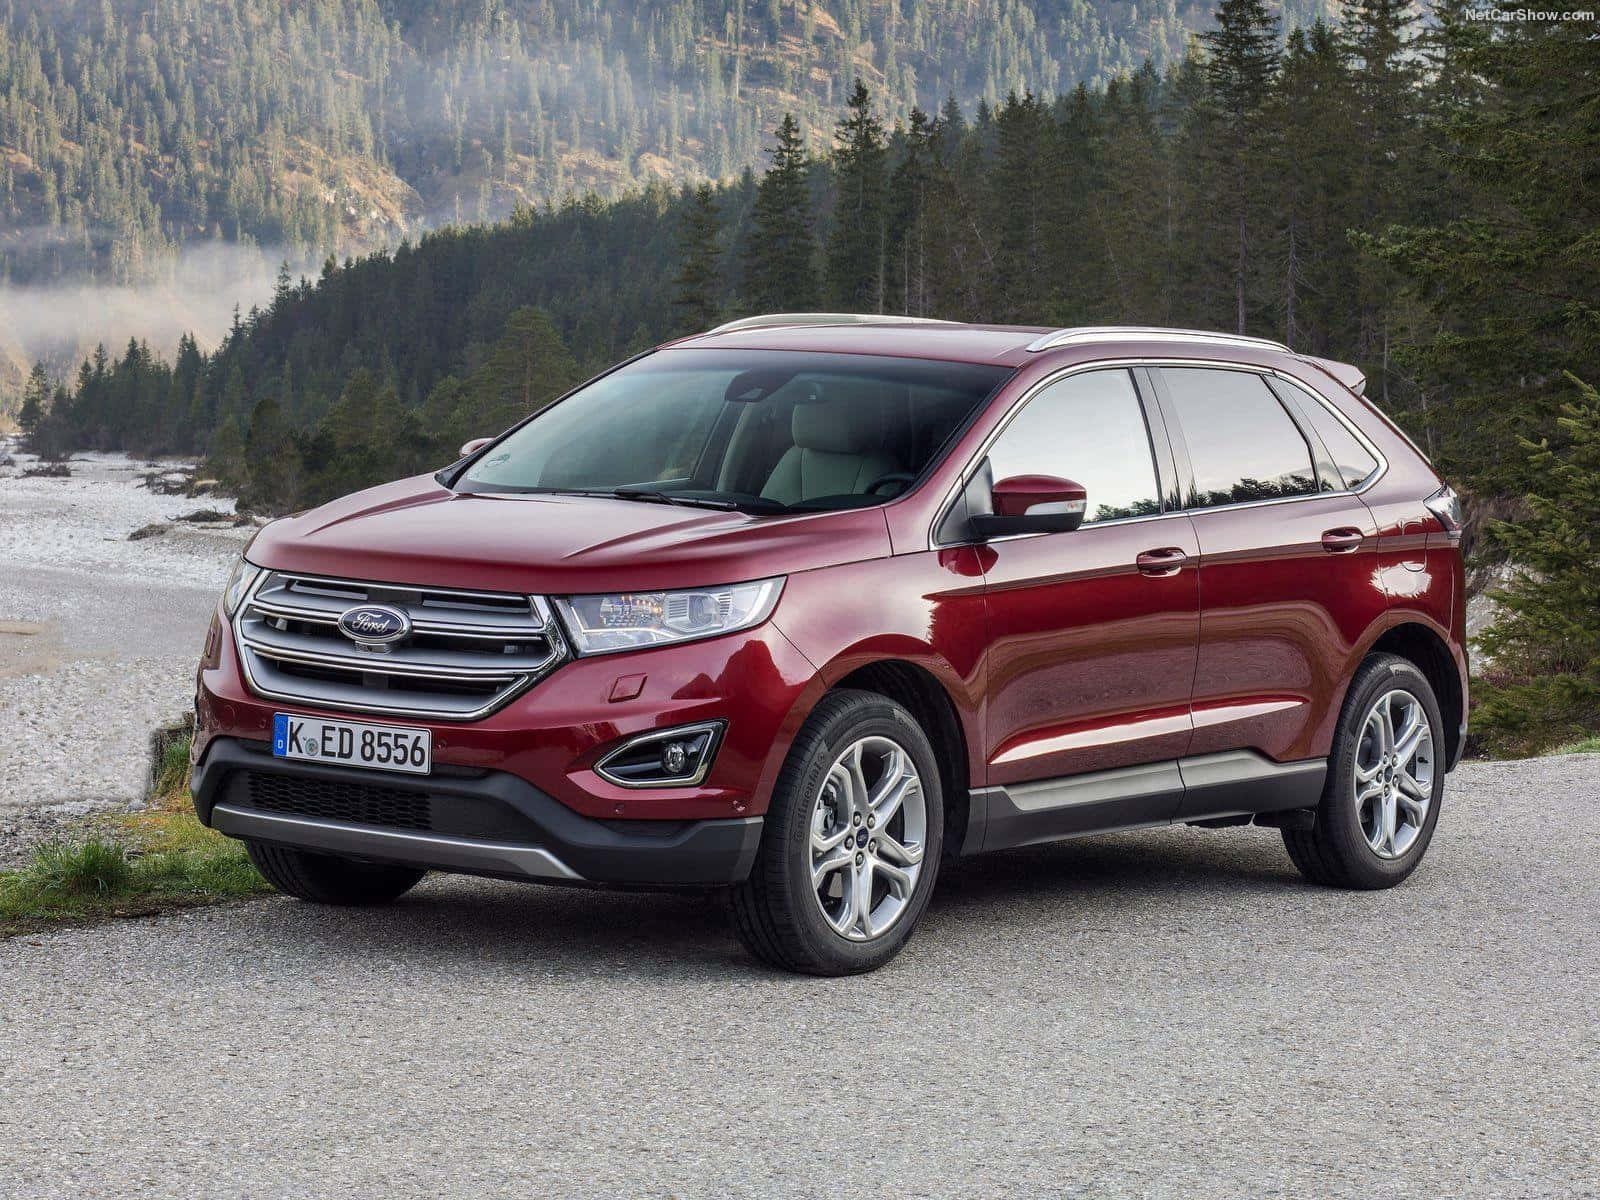 Stylish Ford Edge Cruising on an Open Road Wallpaper